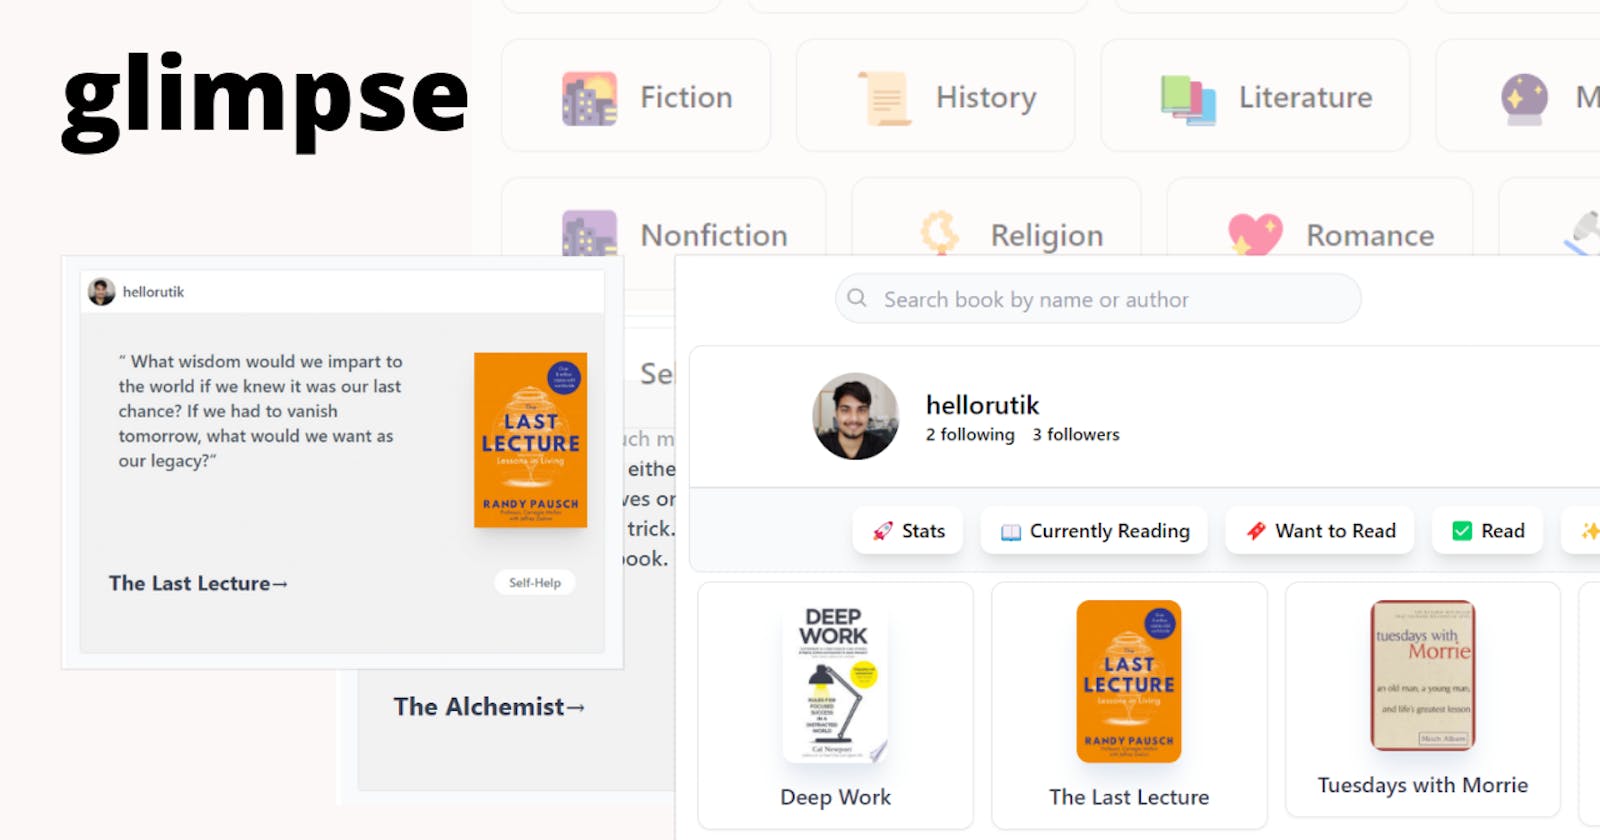 Introducing glimpse, a reader's corner to discover new books